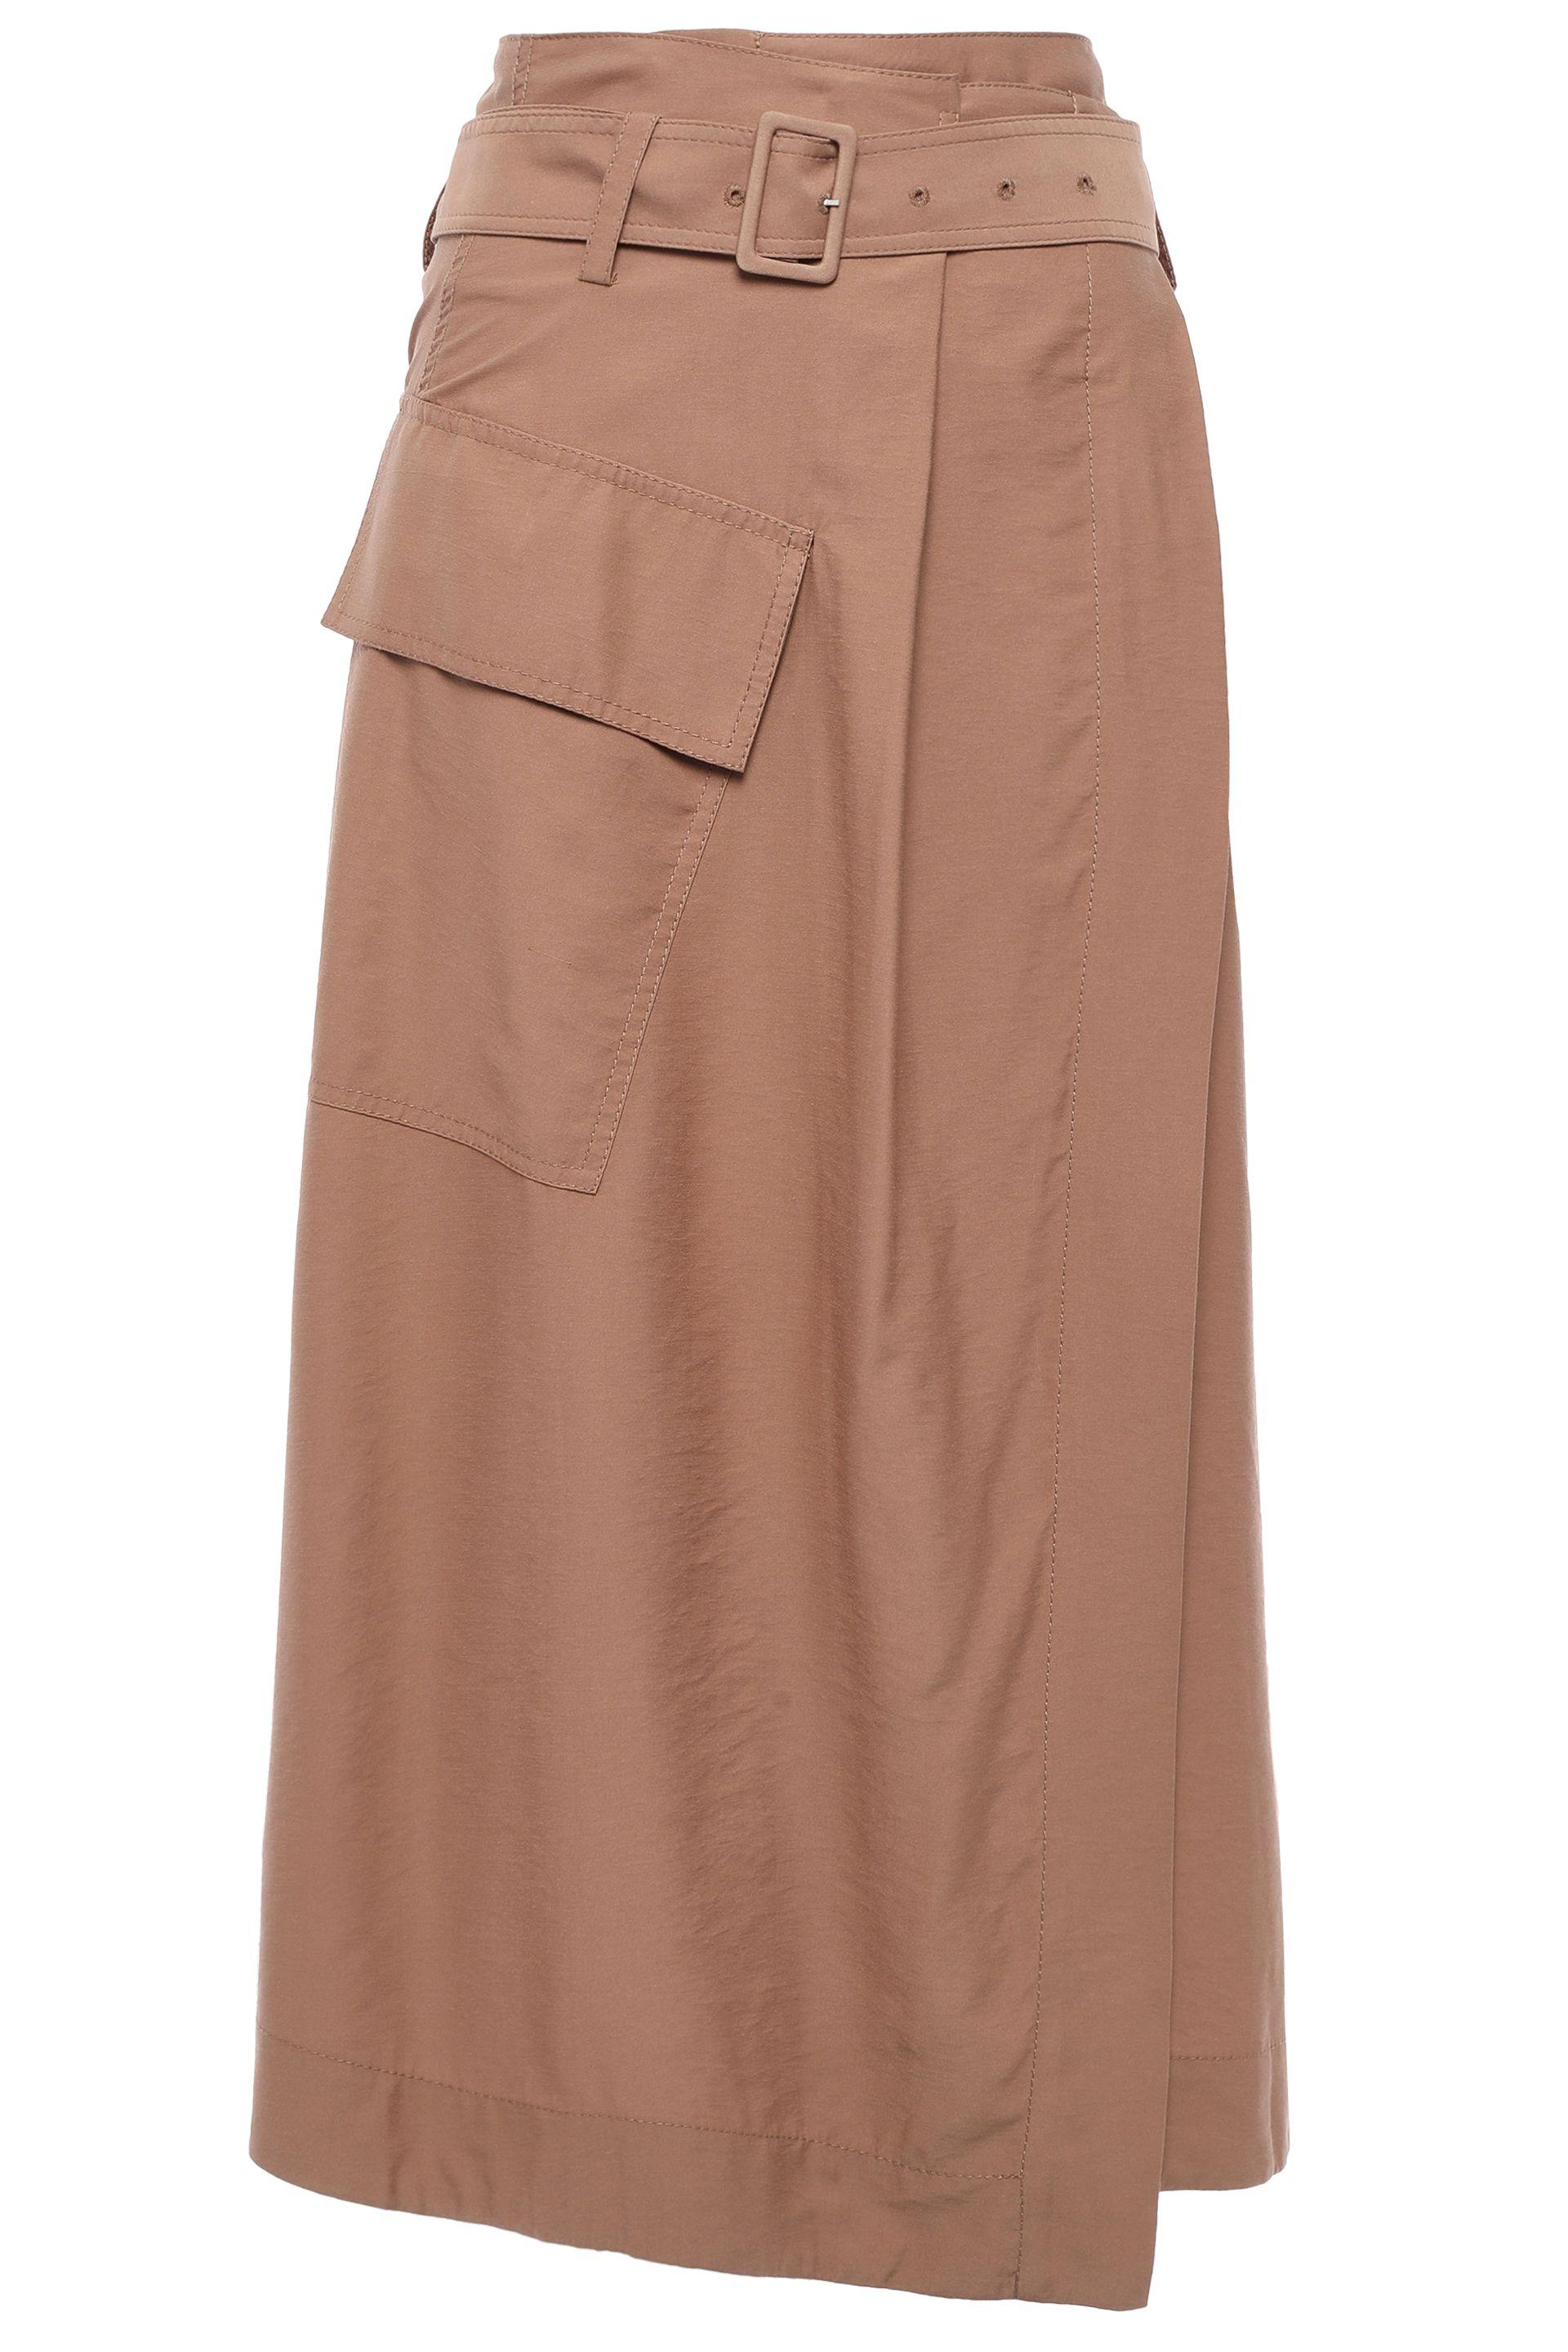 Vince Synthetic Belted Twill Midi Wrap Skirt Camel in Natural - Lyst